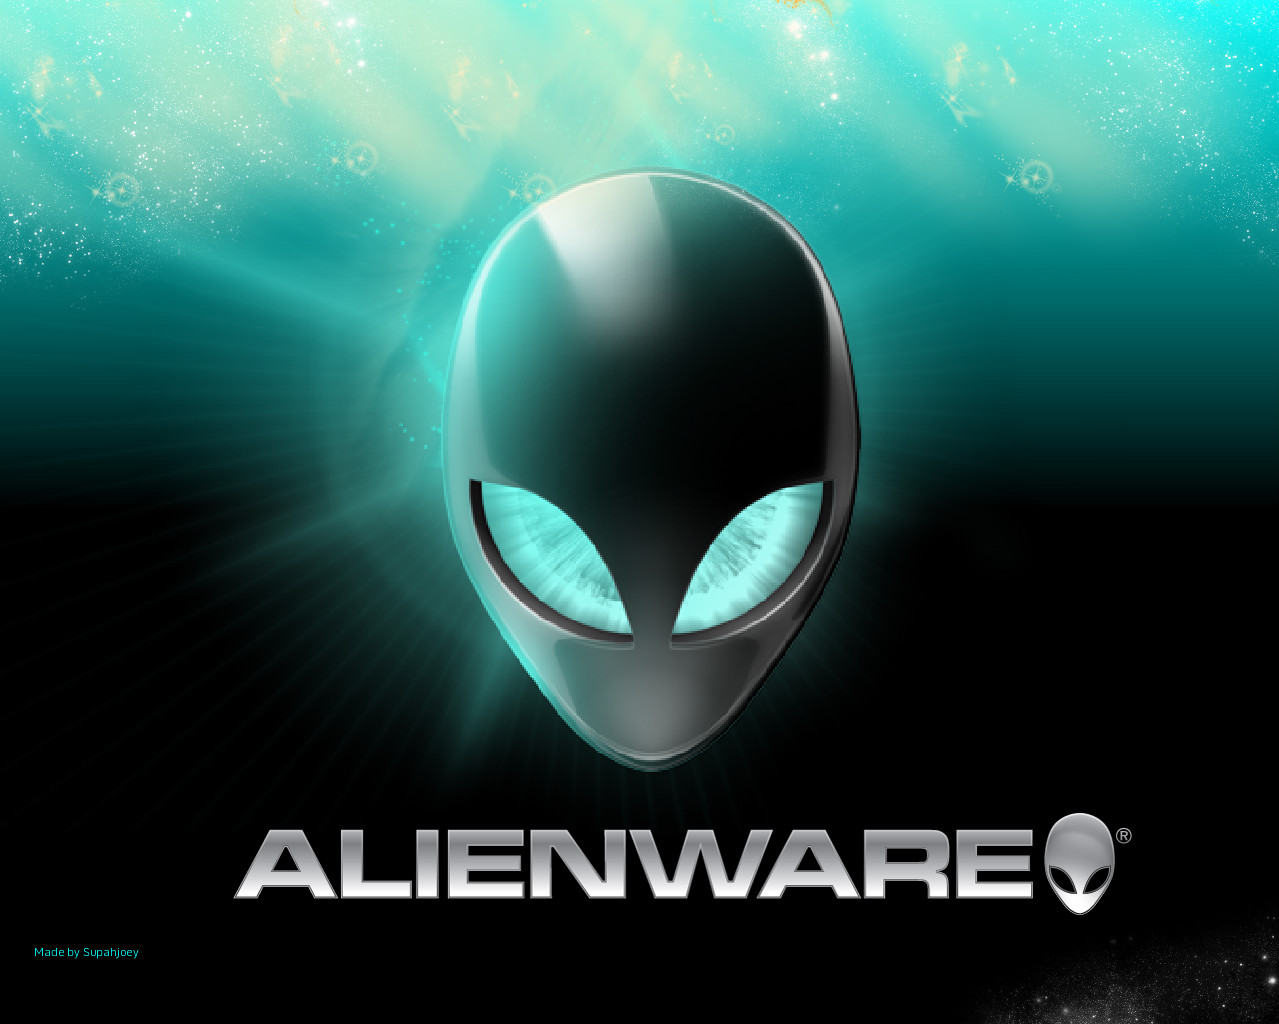 Here Is Alienware Windows Wallpaper And Image Gallery